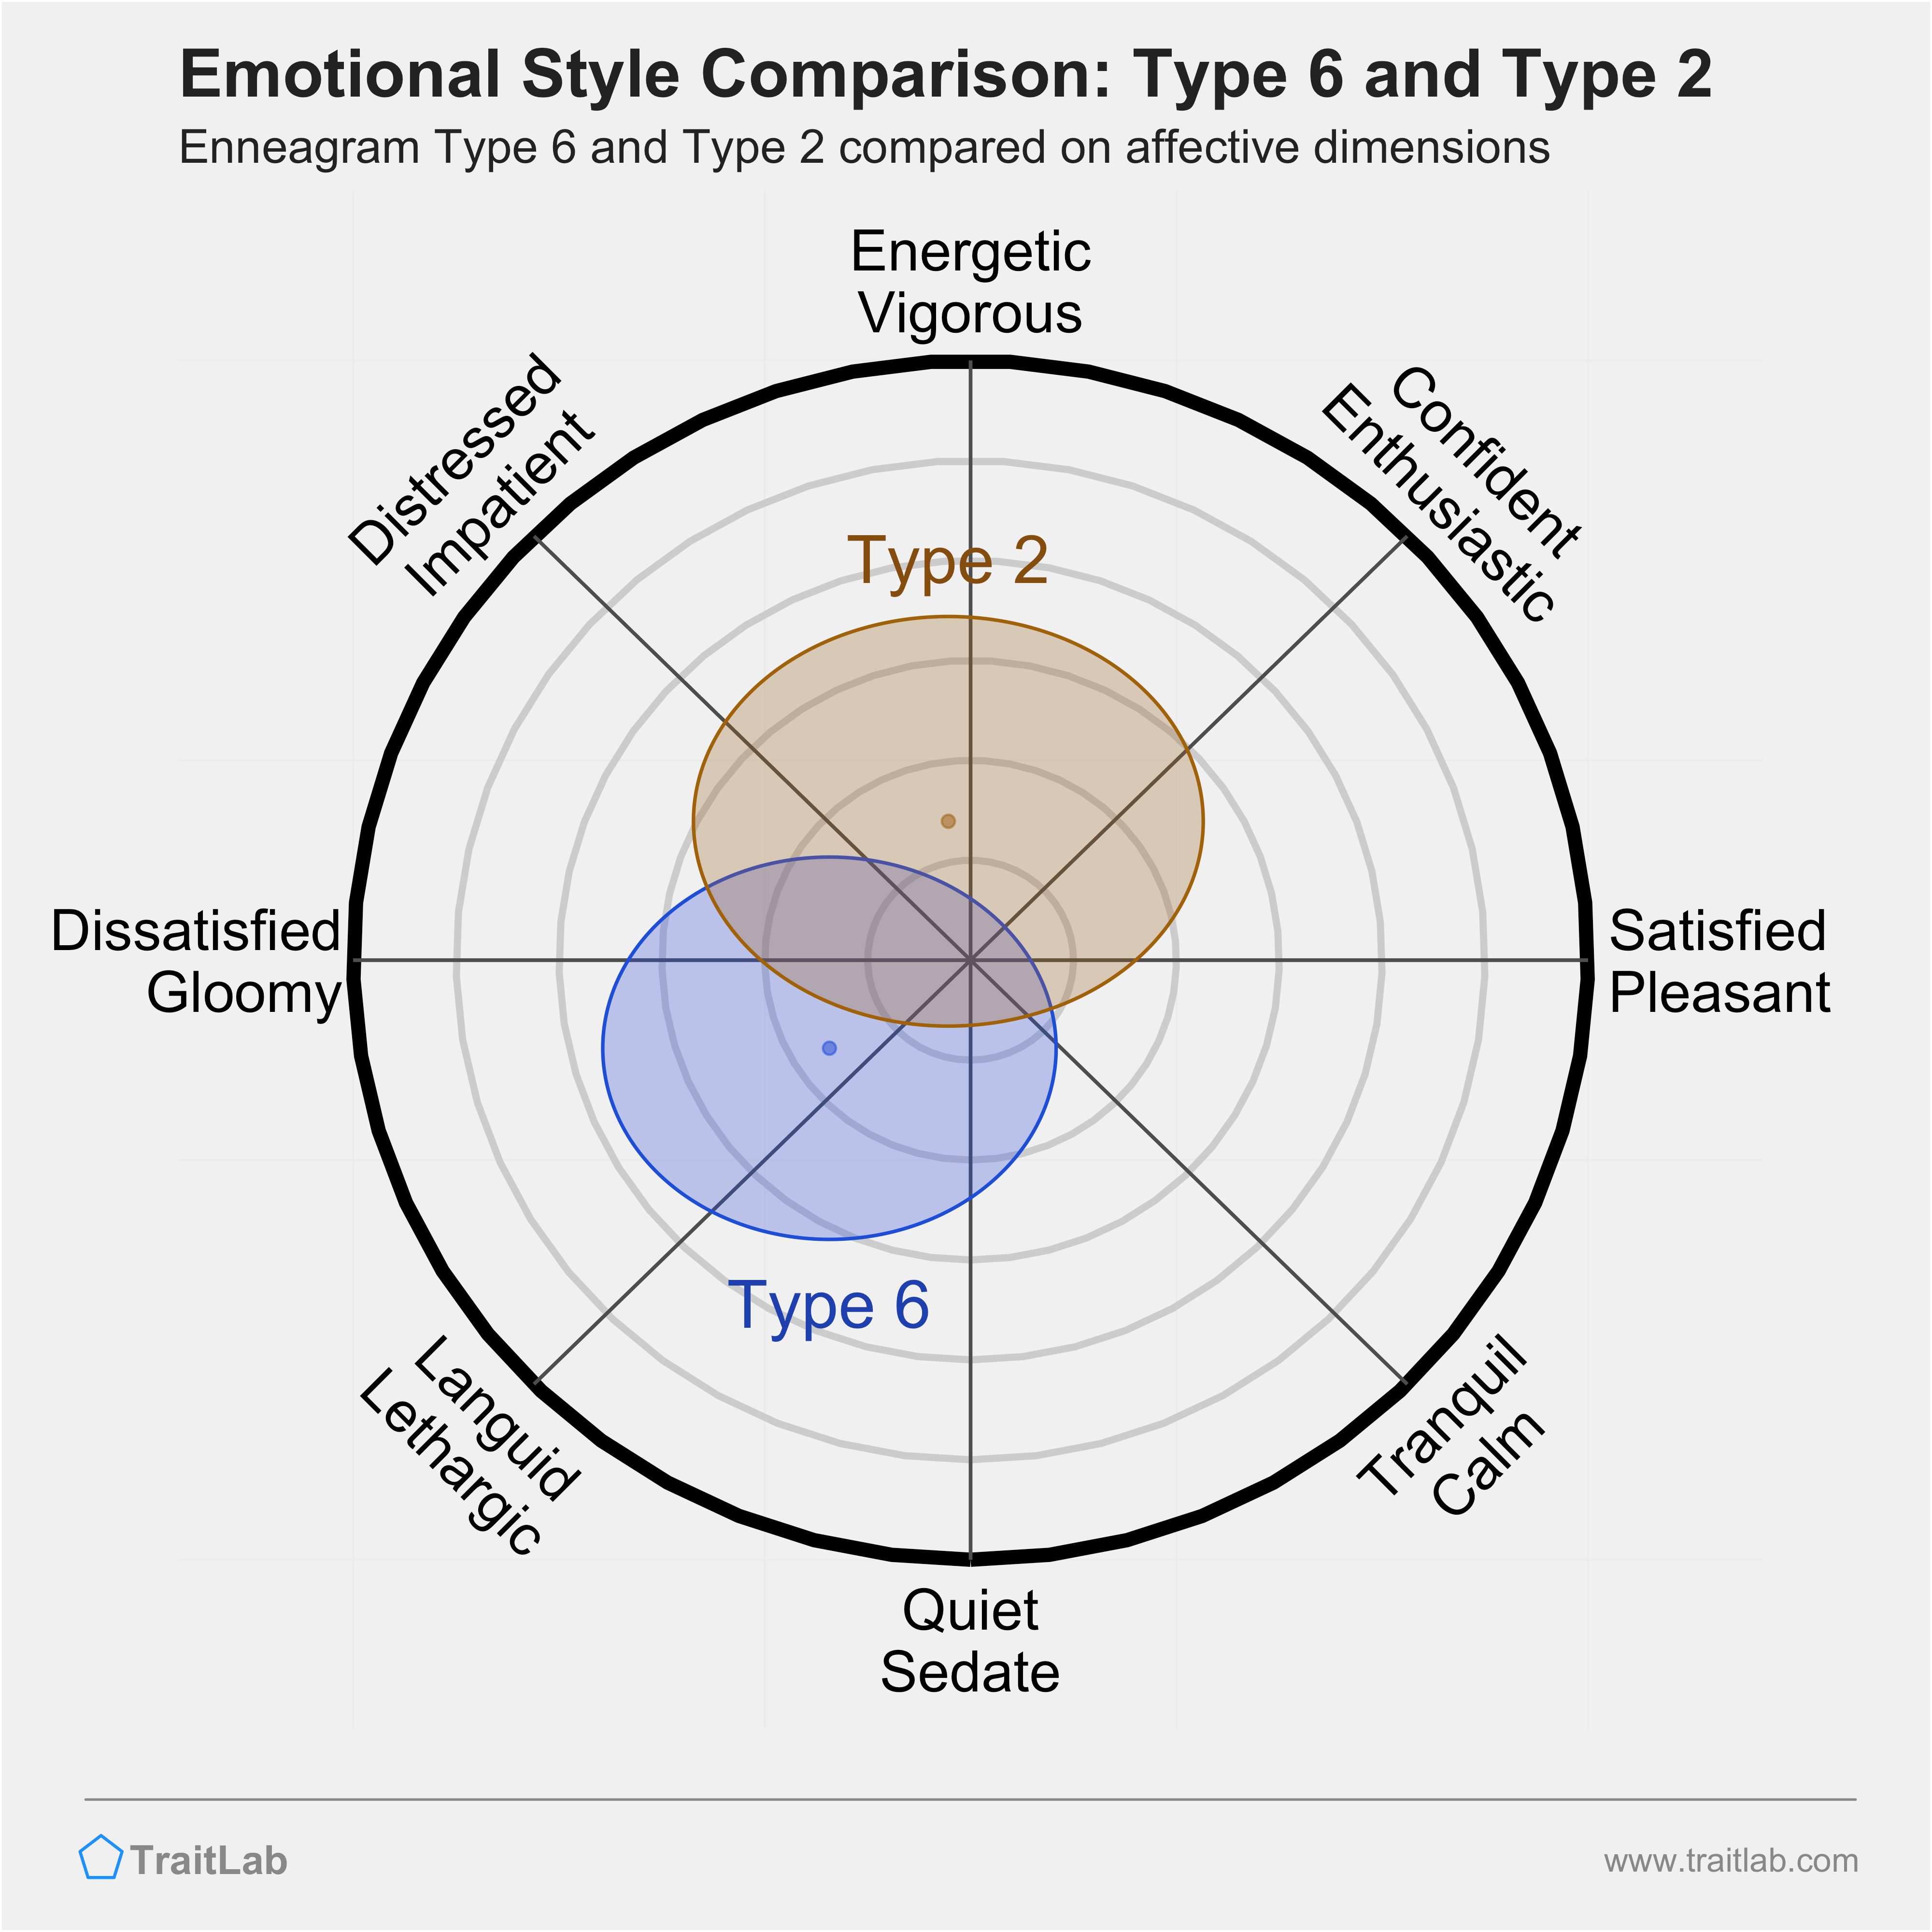 Type 6 and Type 2 comparison across emotional (affective) dimensions